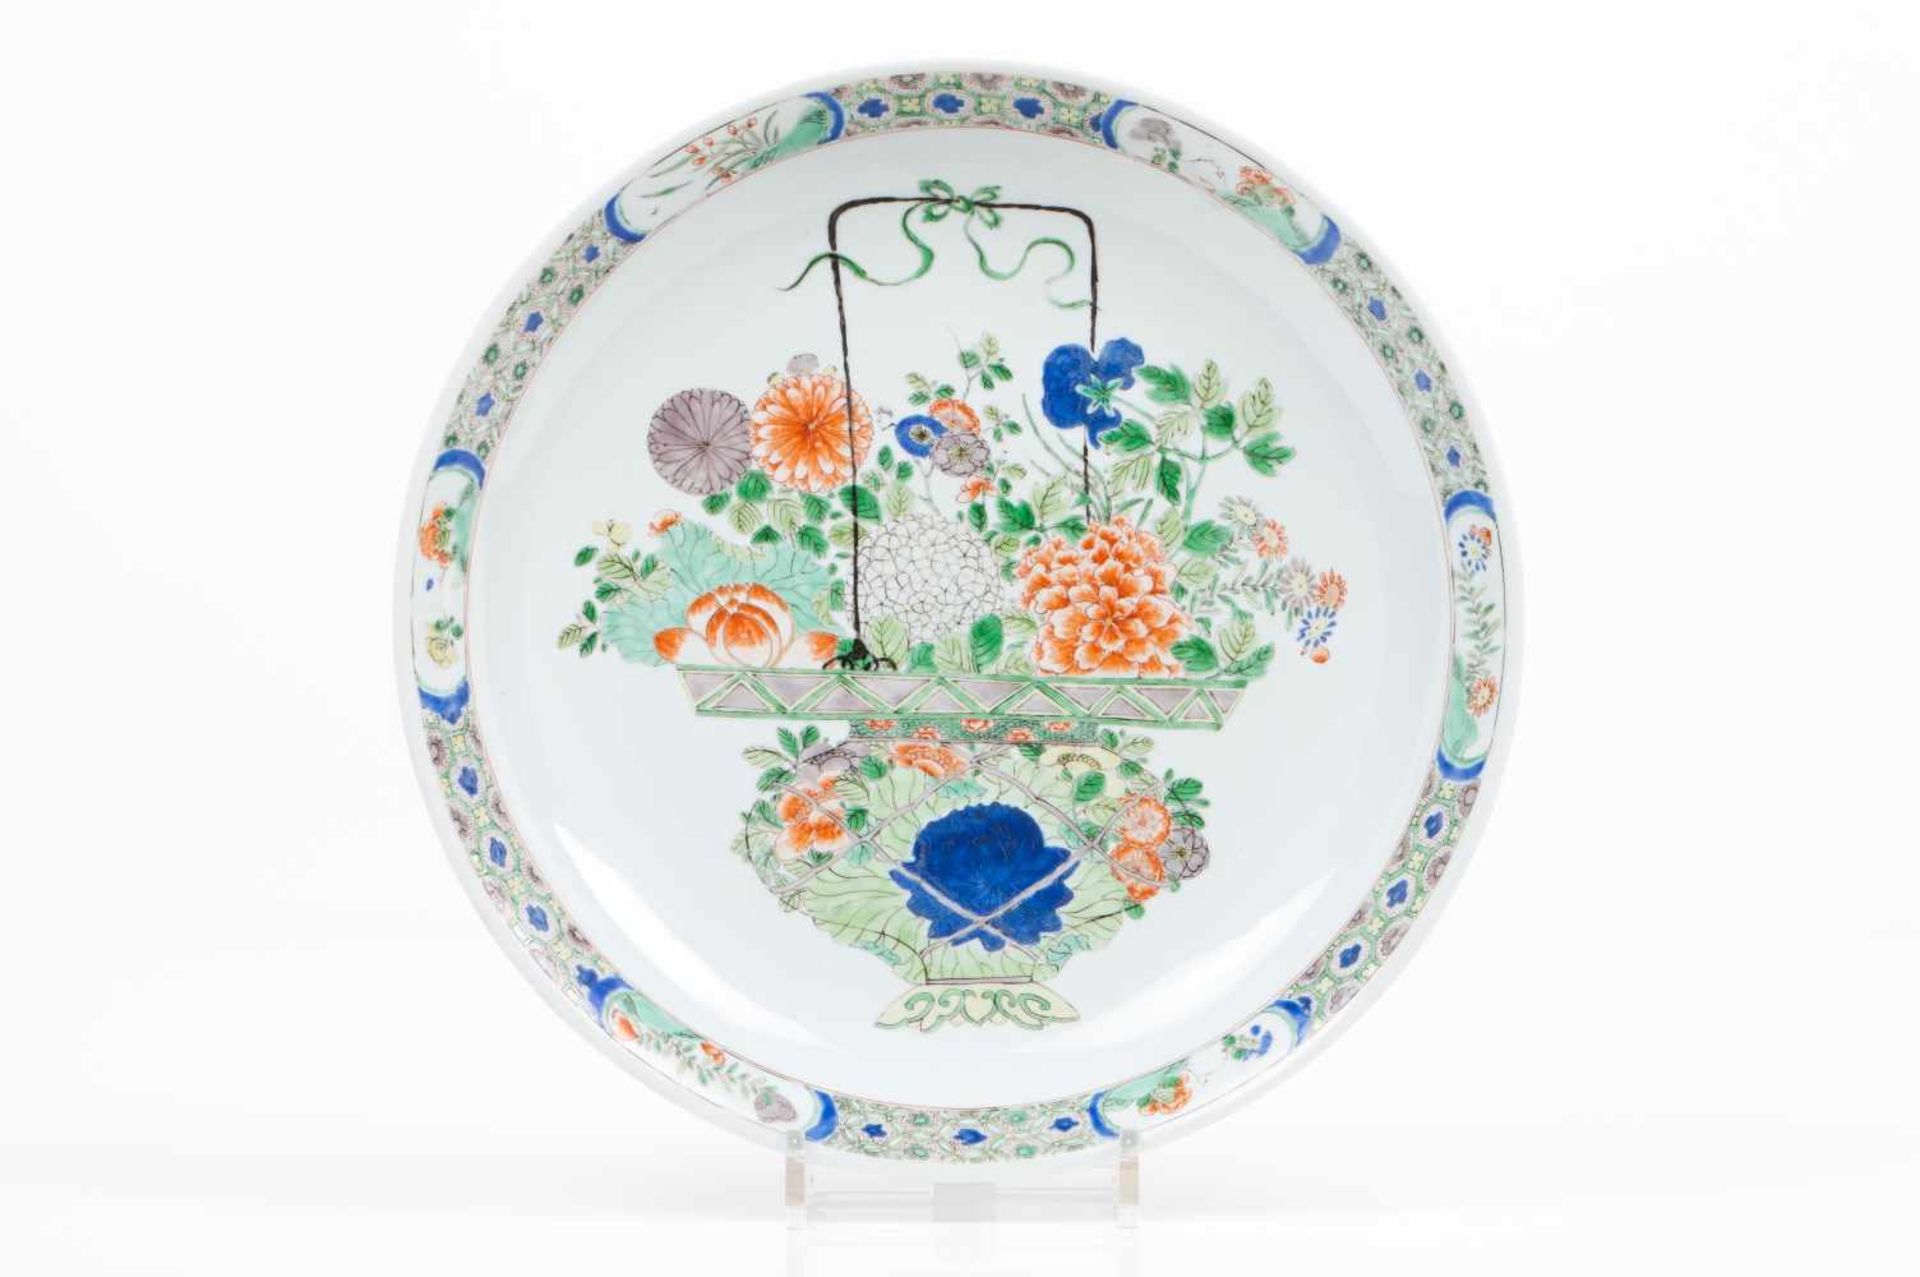 A large plateChinese export porcelainPolychrome "Famille Verte" enamels decoration with central